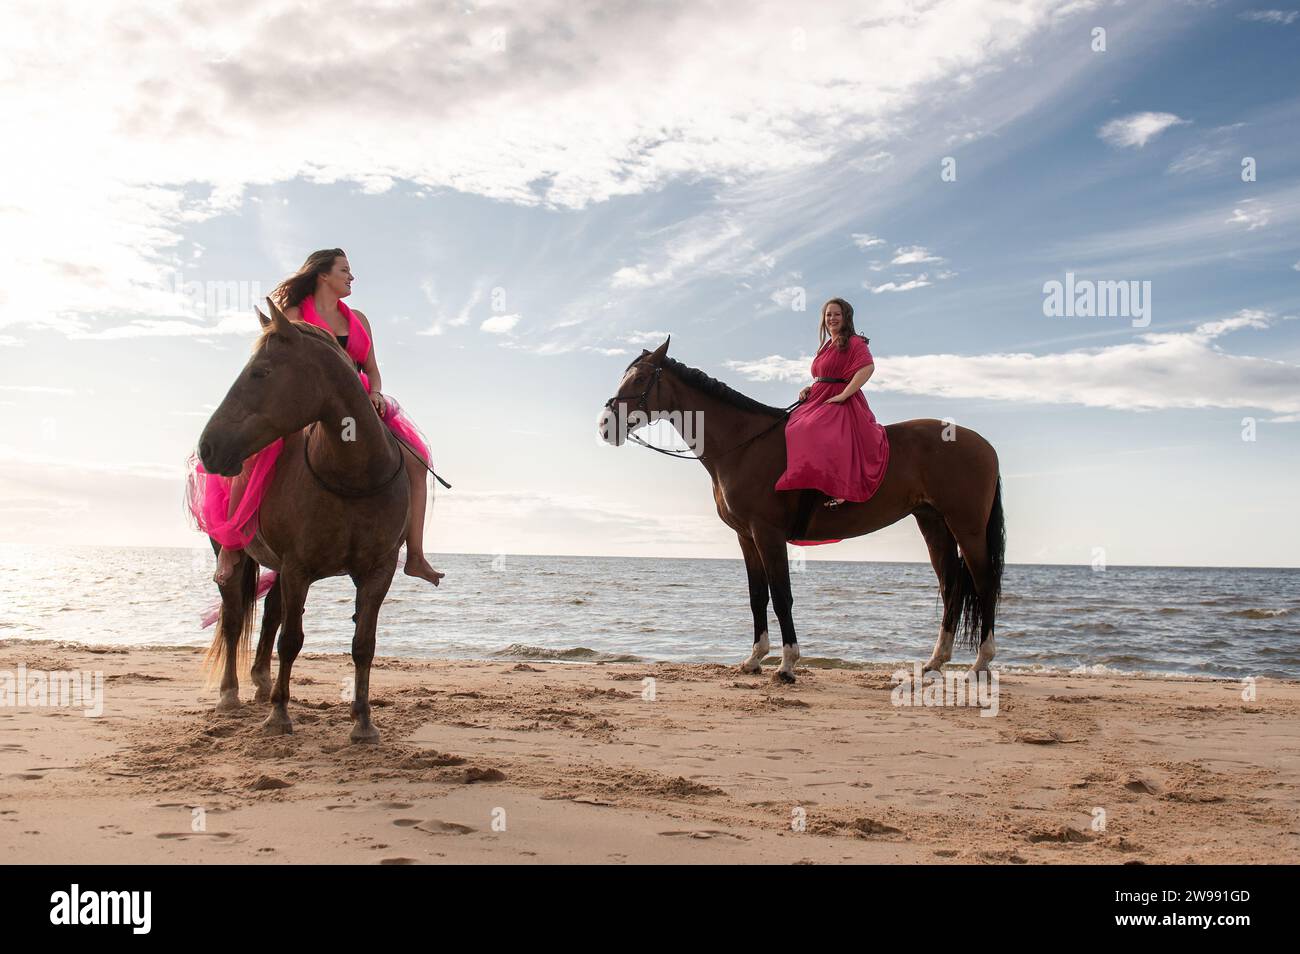 A pair of young female friends in matching dresses posing on horses standing on a beach Stock Photo